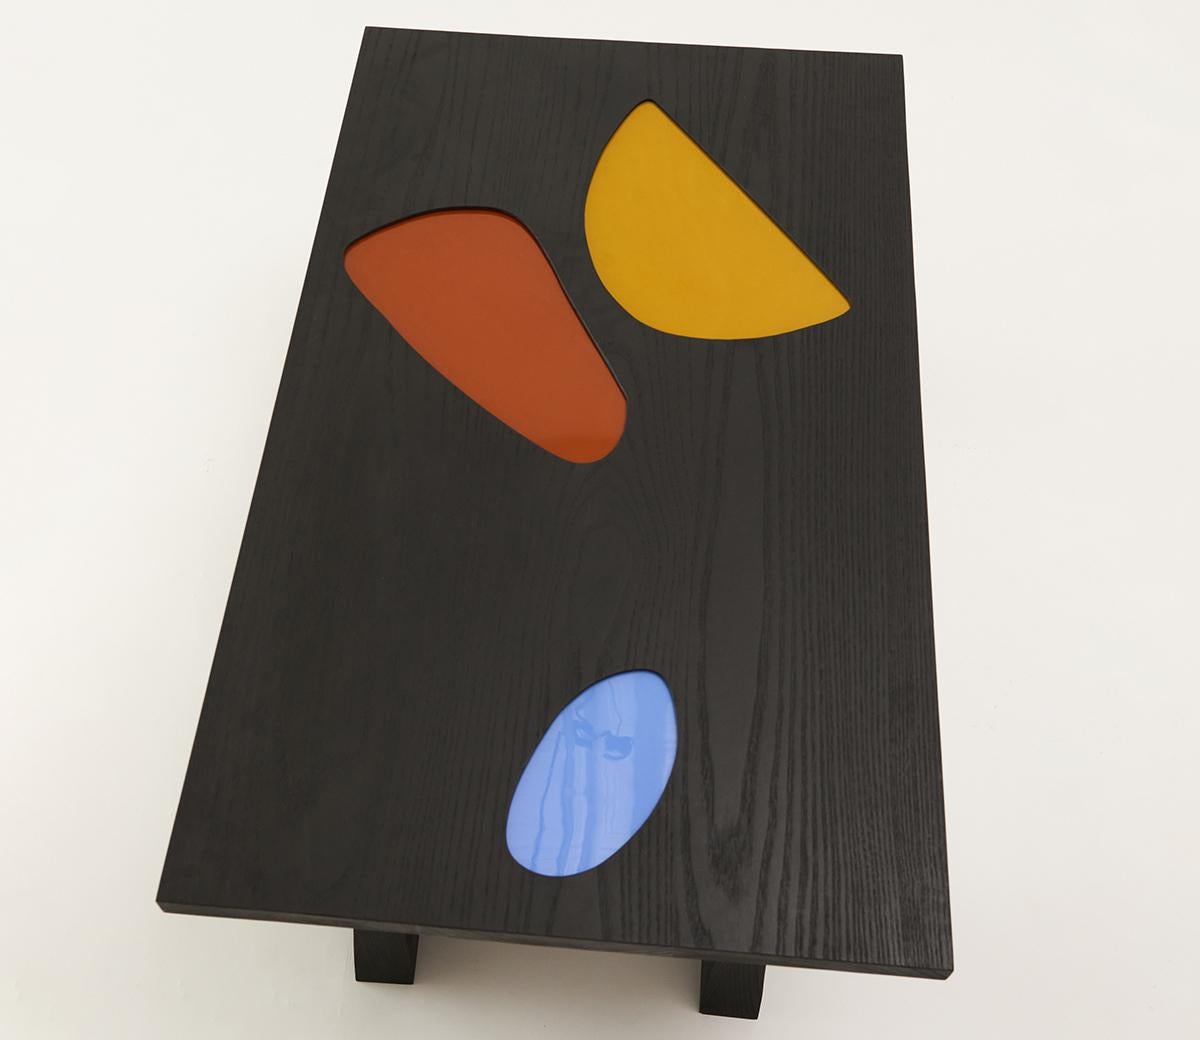 In the Reflection coffee table, abstract colored pools of opalescent and transparent stained glass are inlaid into the surface of the table top, creating soft ripples of color as sunlight and shadow move within the space. This piece pays homage to